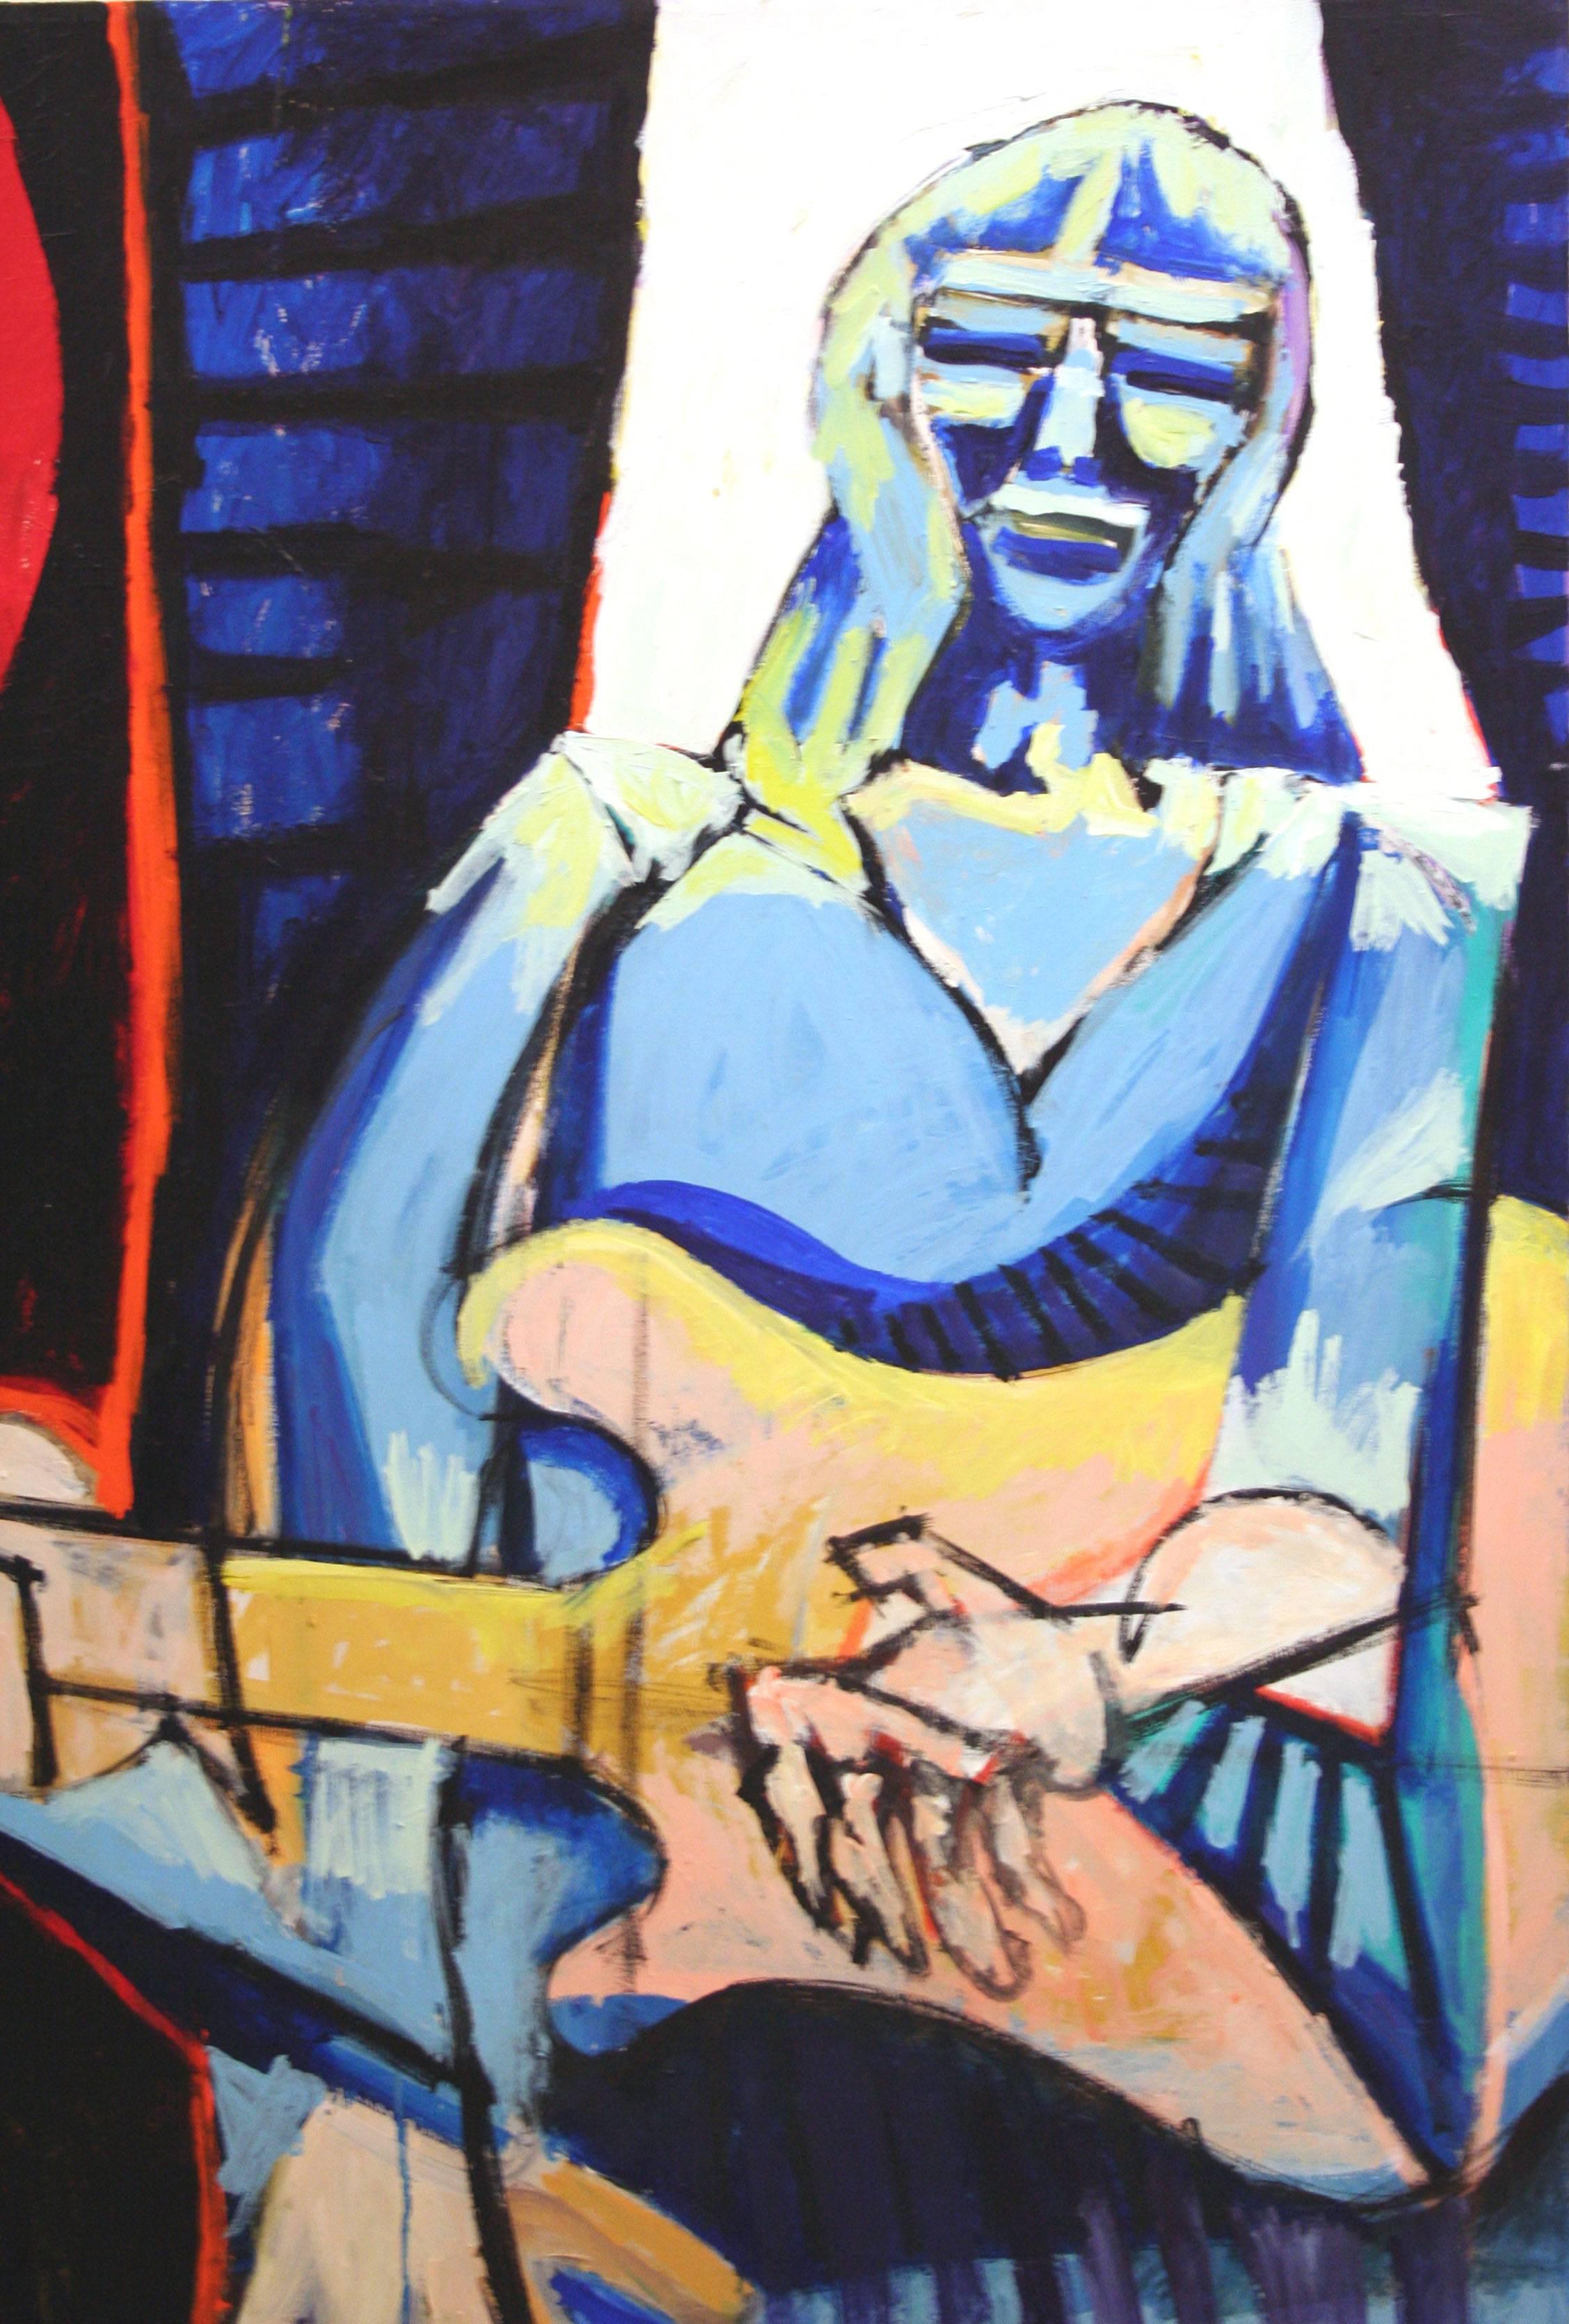 Courtney Love and Guitar Abstract Expressionist Figurative - Painting by Michael William Eggleston